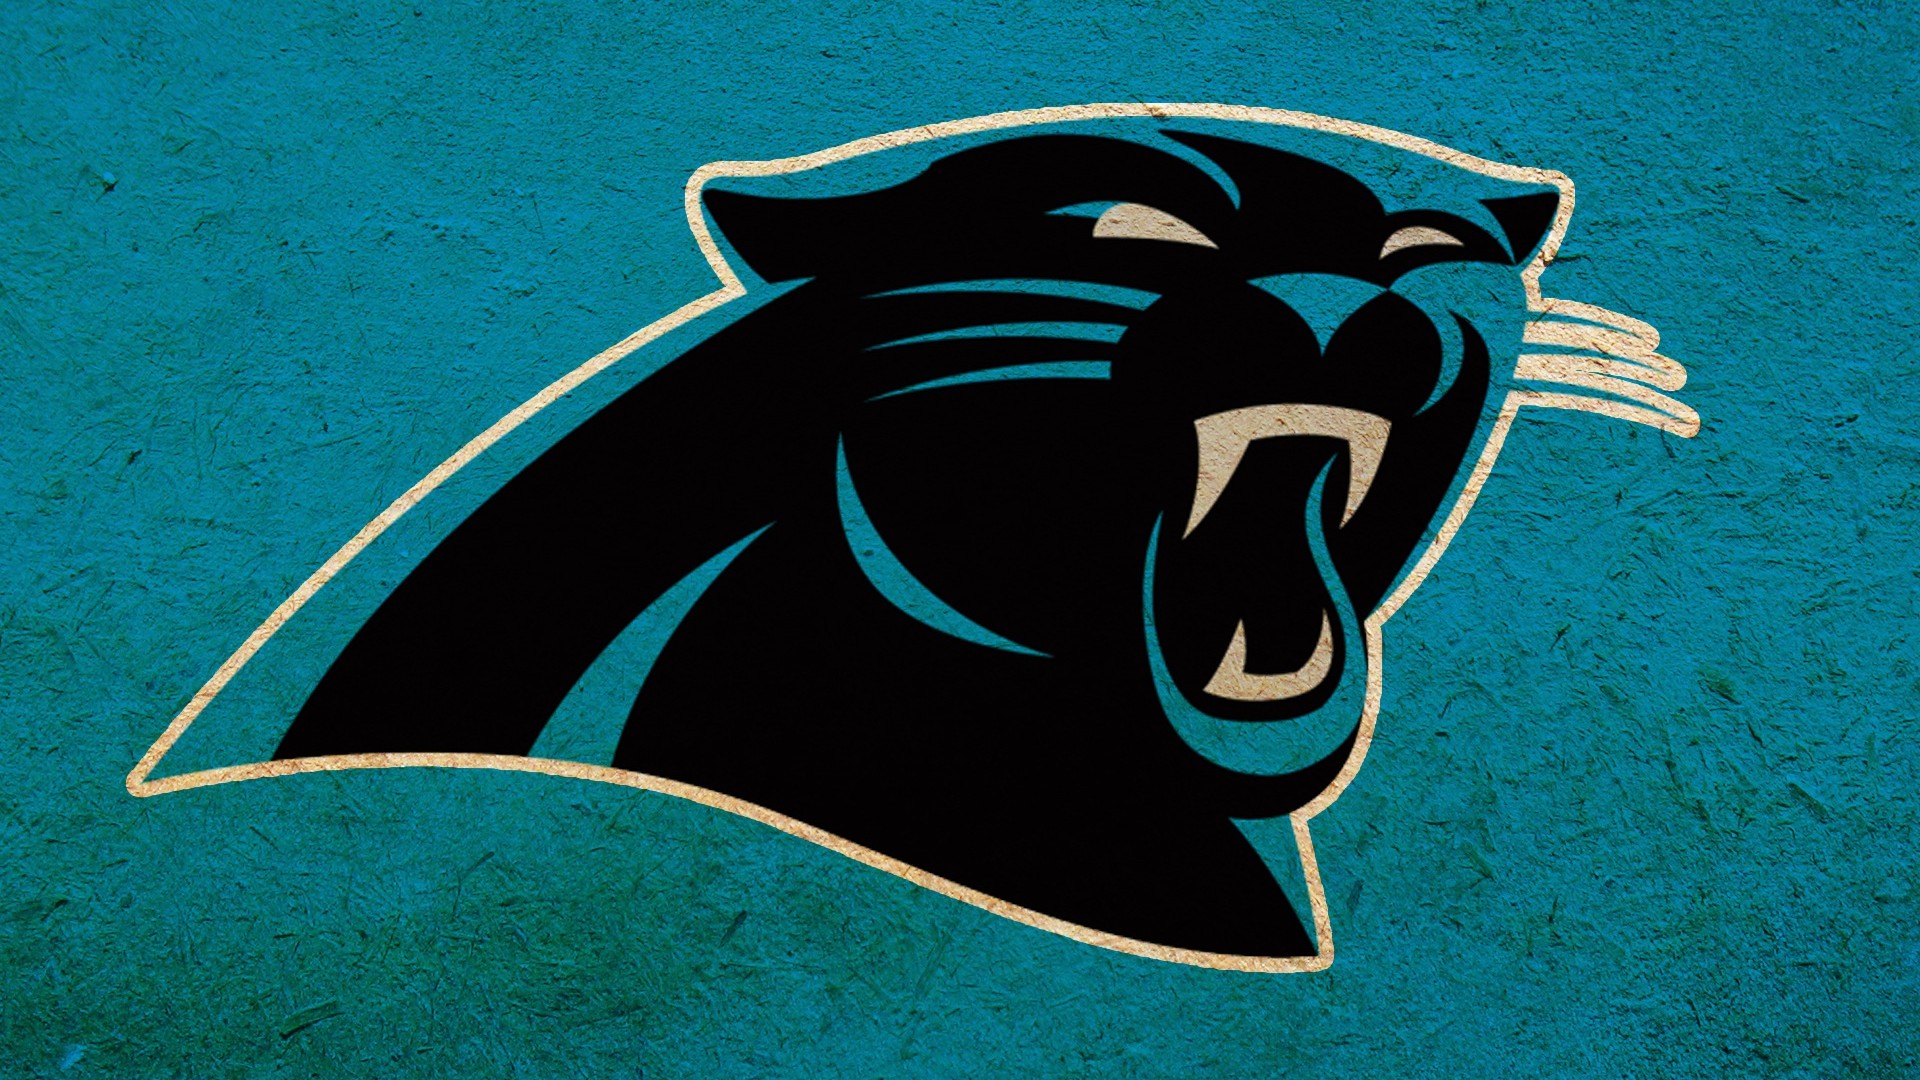 Wallpapers HD Panthers with high-resolution 1920x1080 pixel. You can use this wallpaper for your Mac or Windows Desktop Background, iPhone, Android or Tablet and another Smartphone device